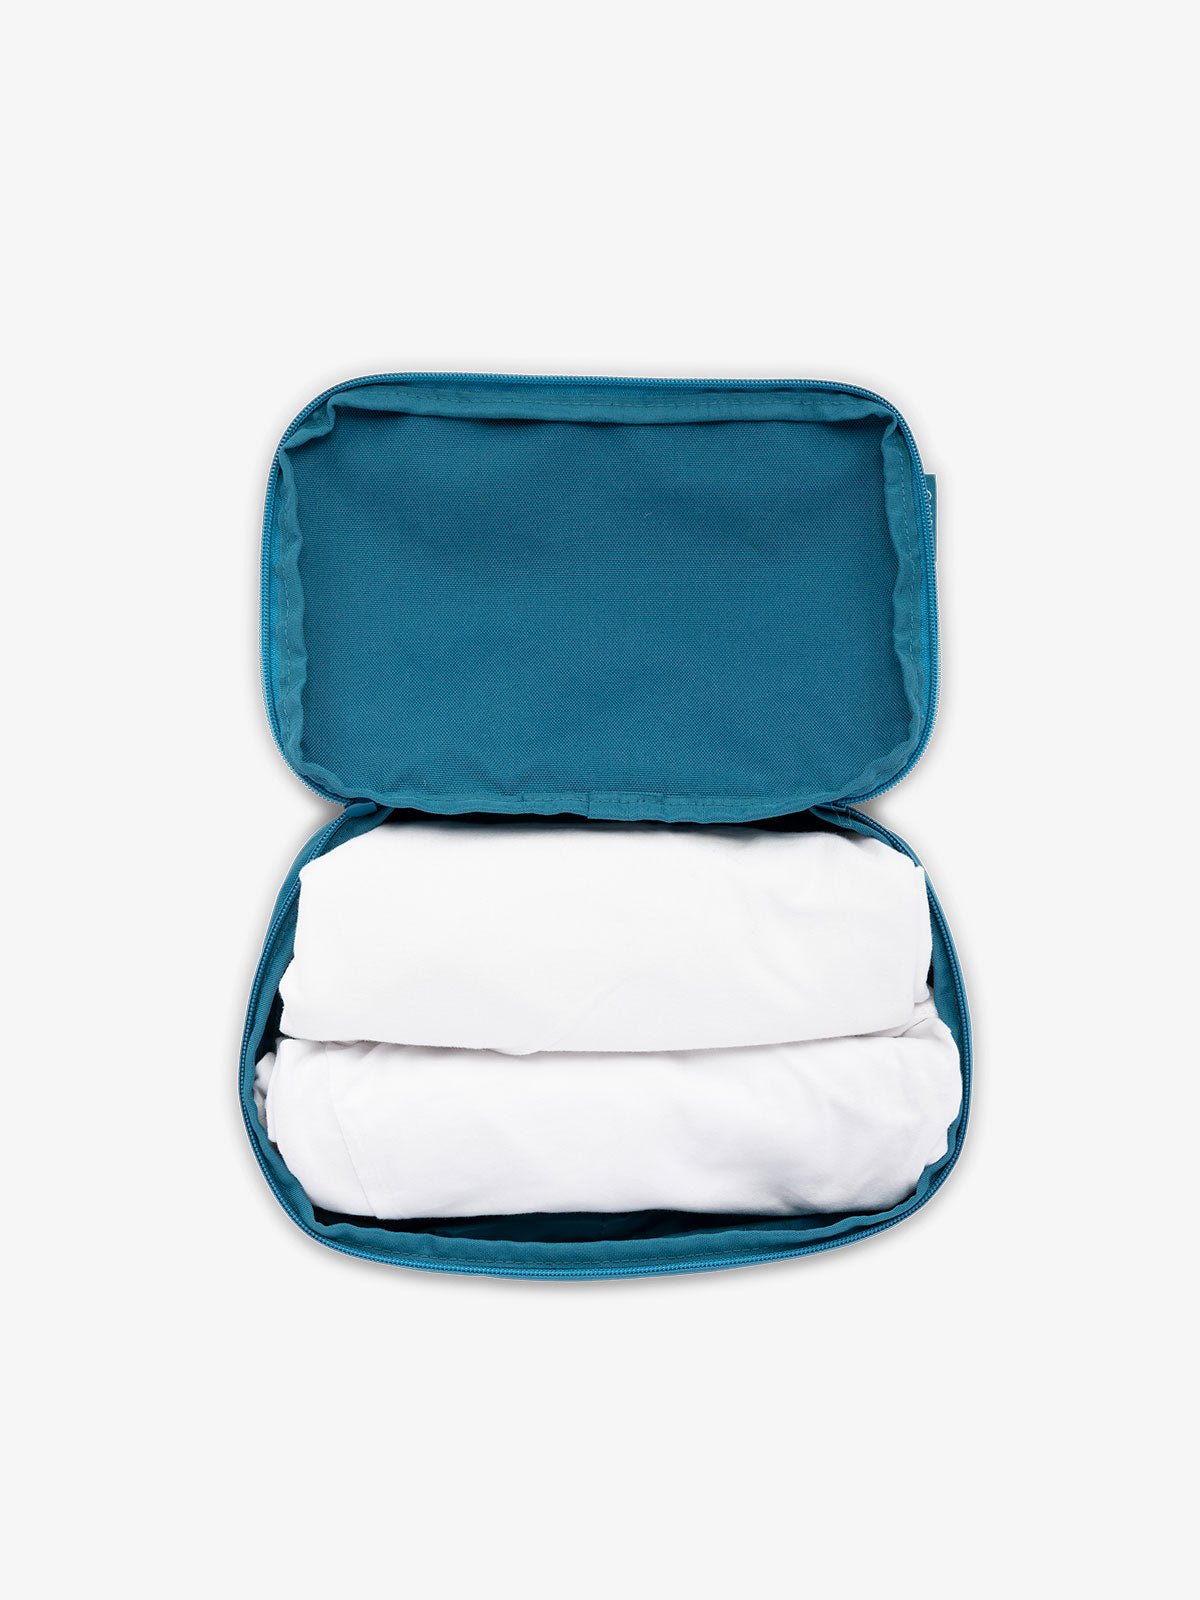 CALPAK small packing cubes for travel made with durable material in lagoon